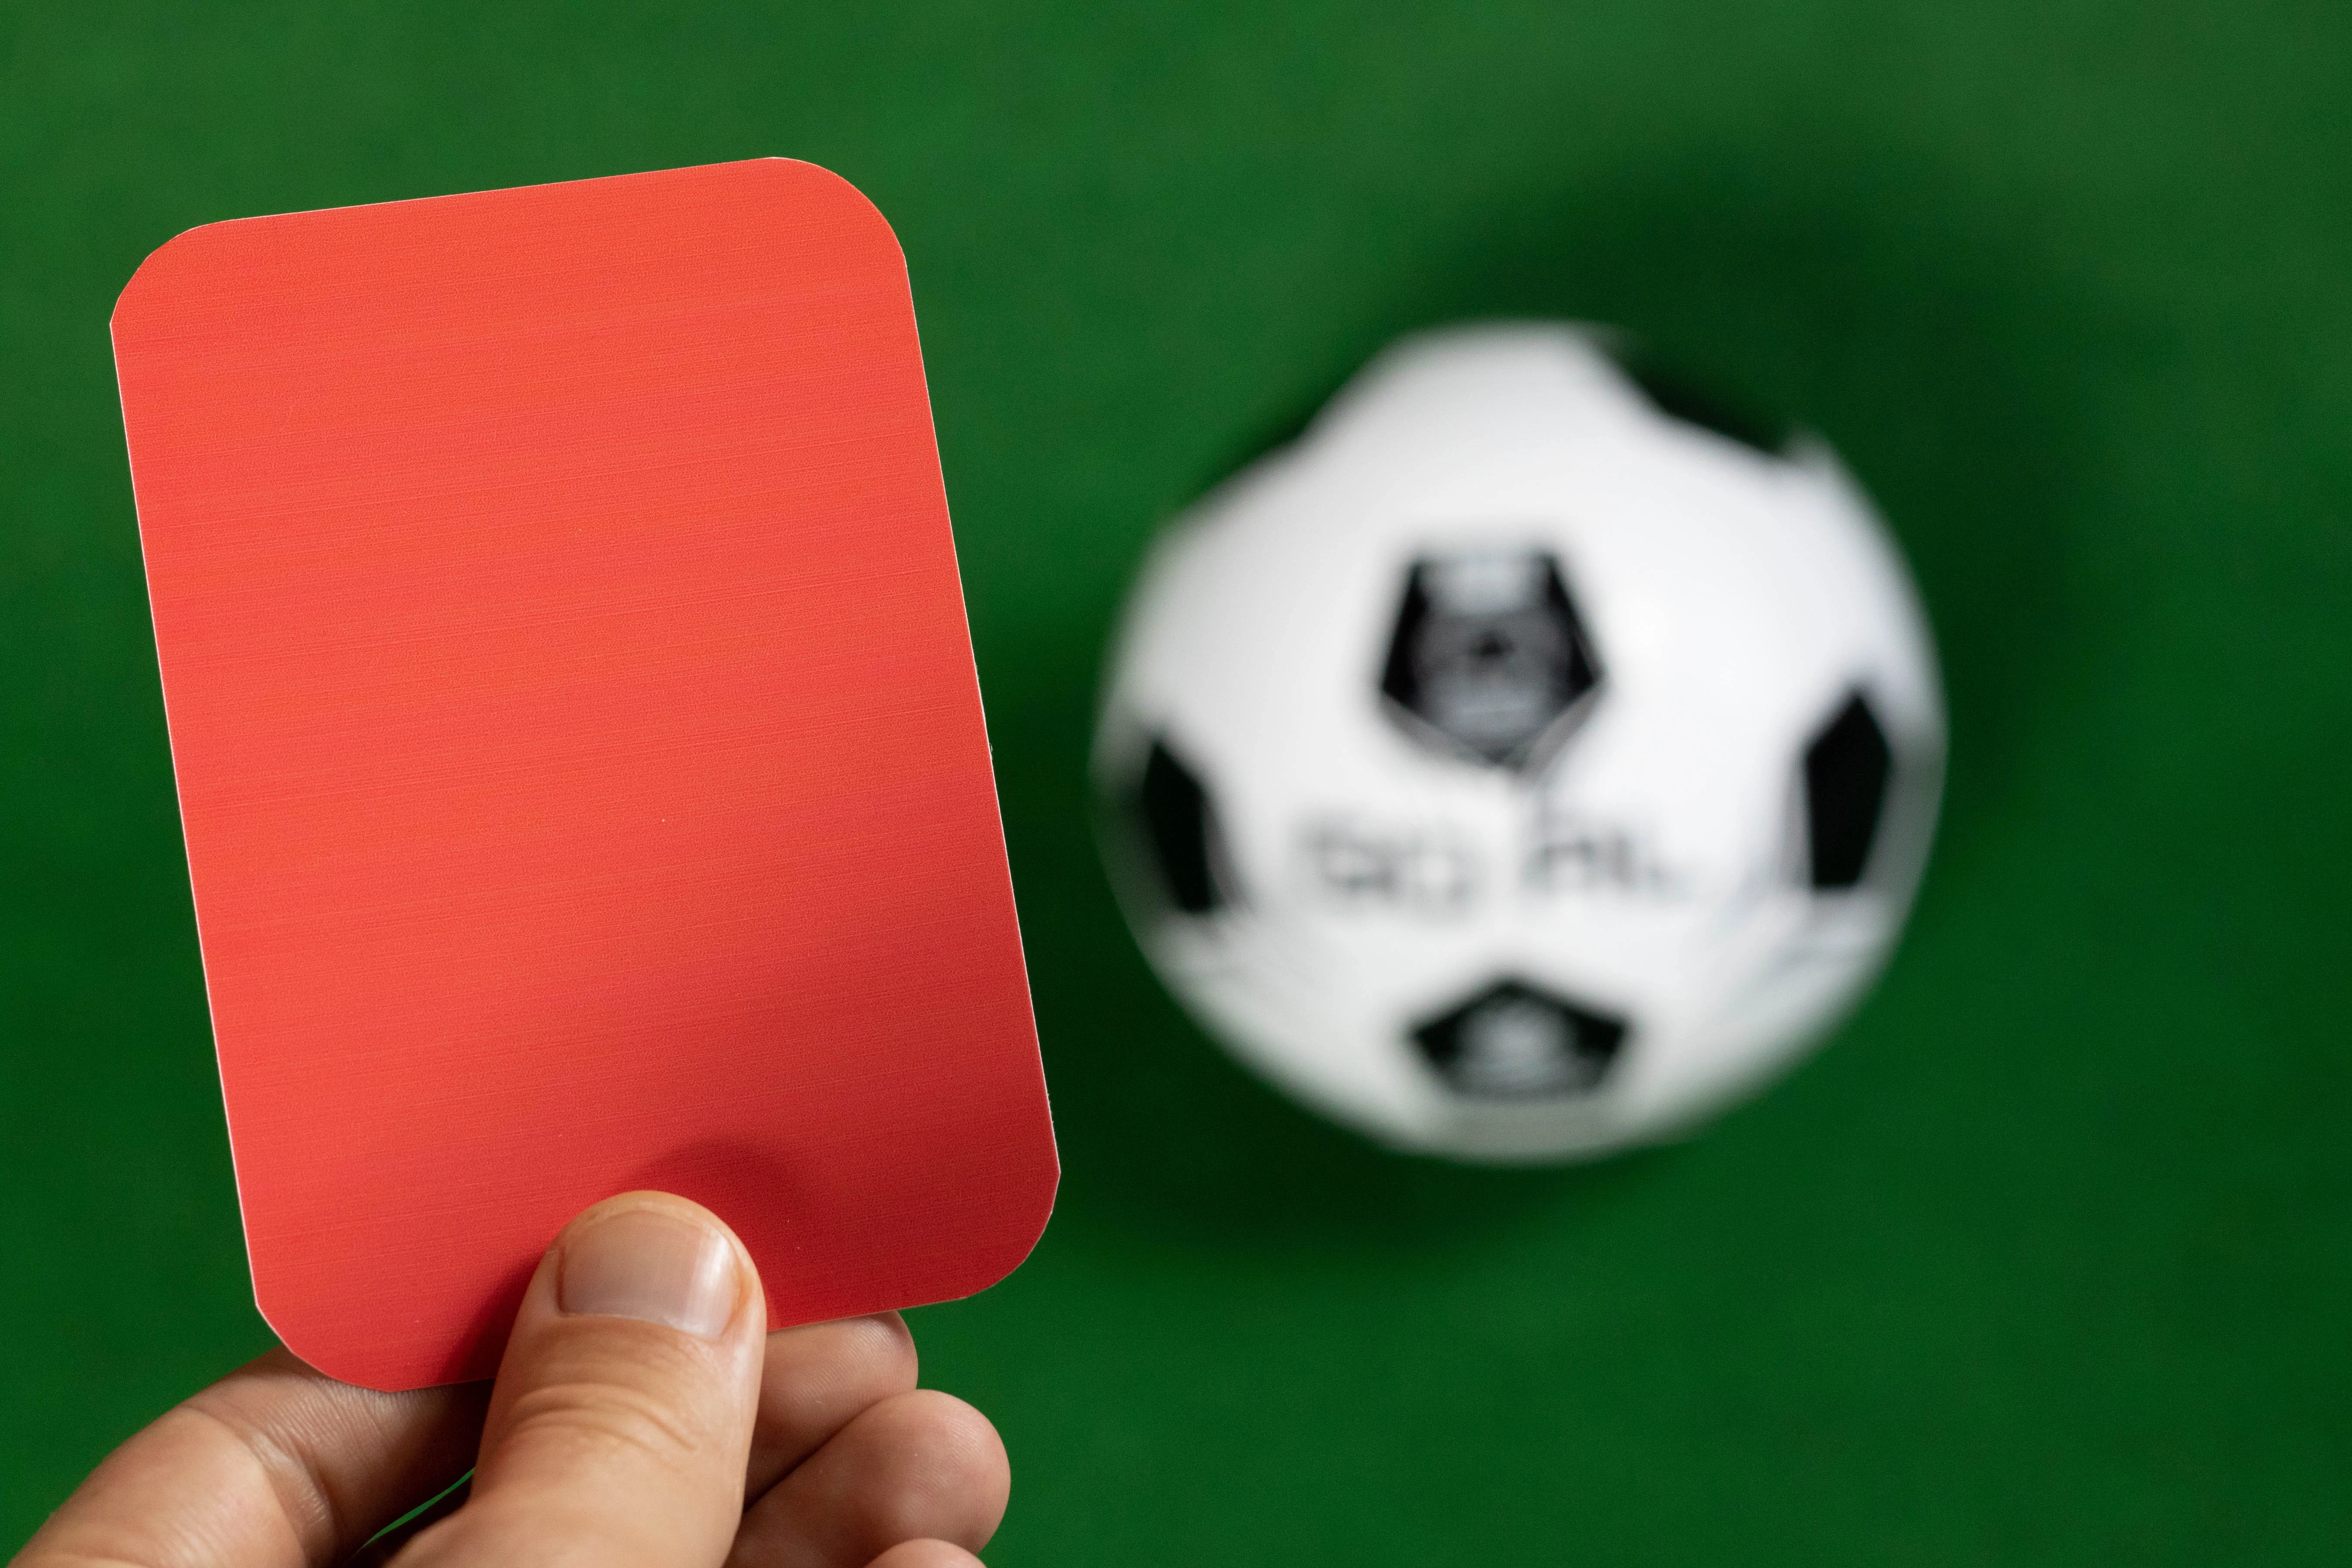 The referee in red card gesture